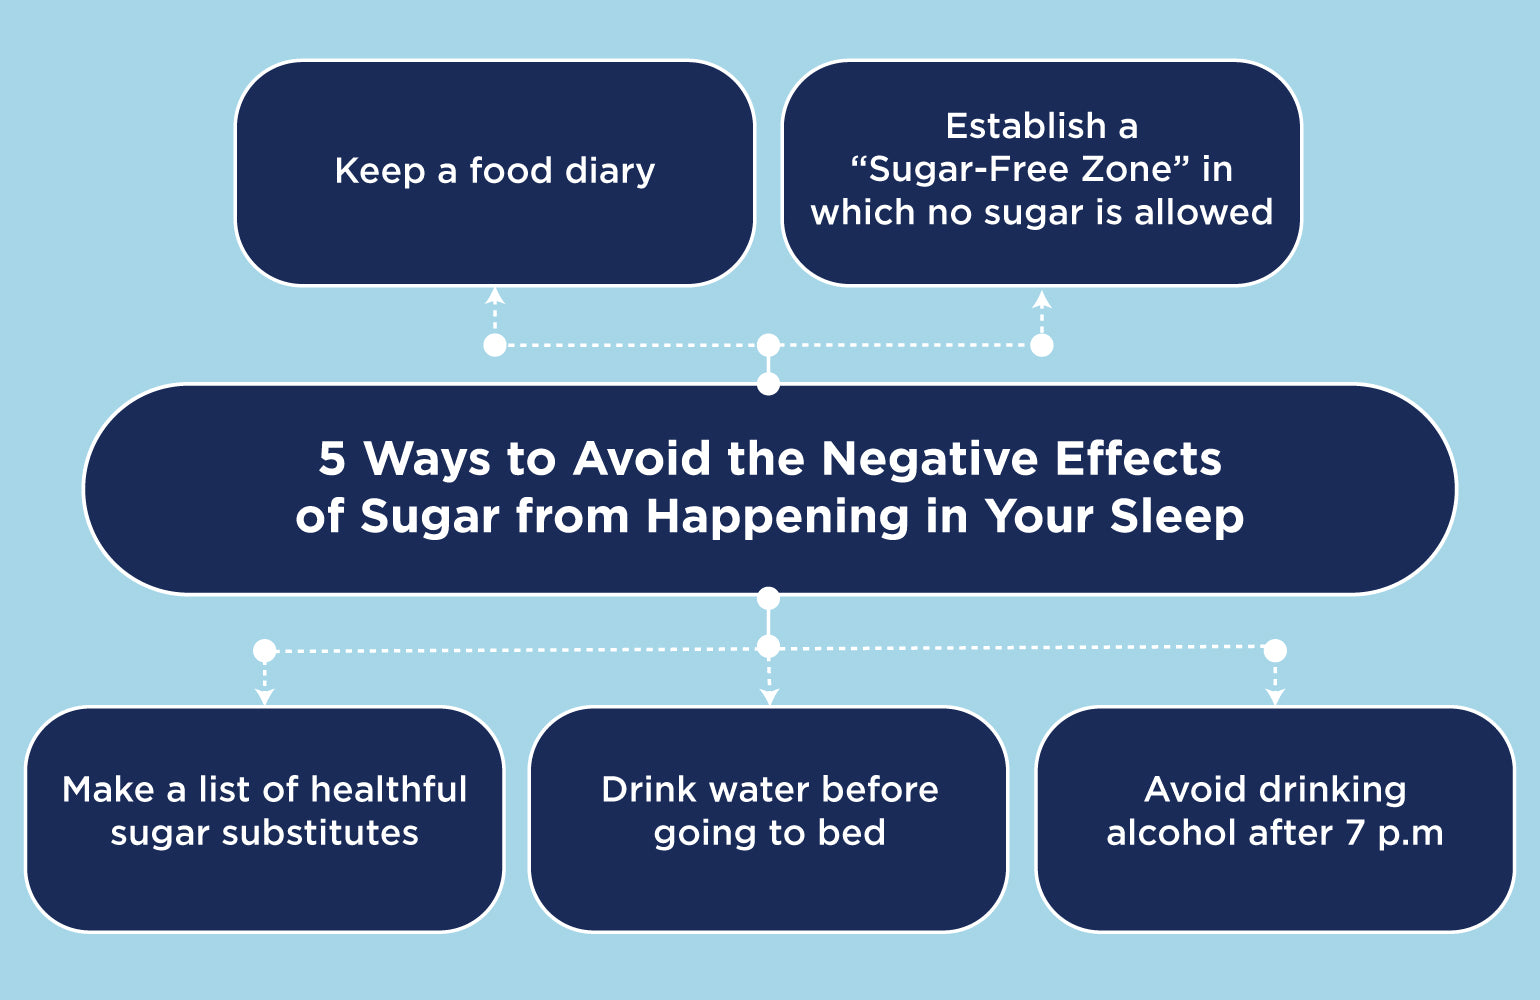 5 Ways to Avoid the Negative Effects of Sugar from Happening in Your Sleep